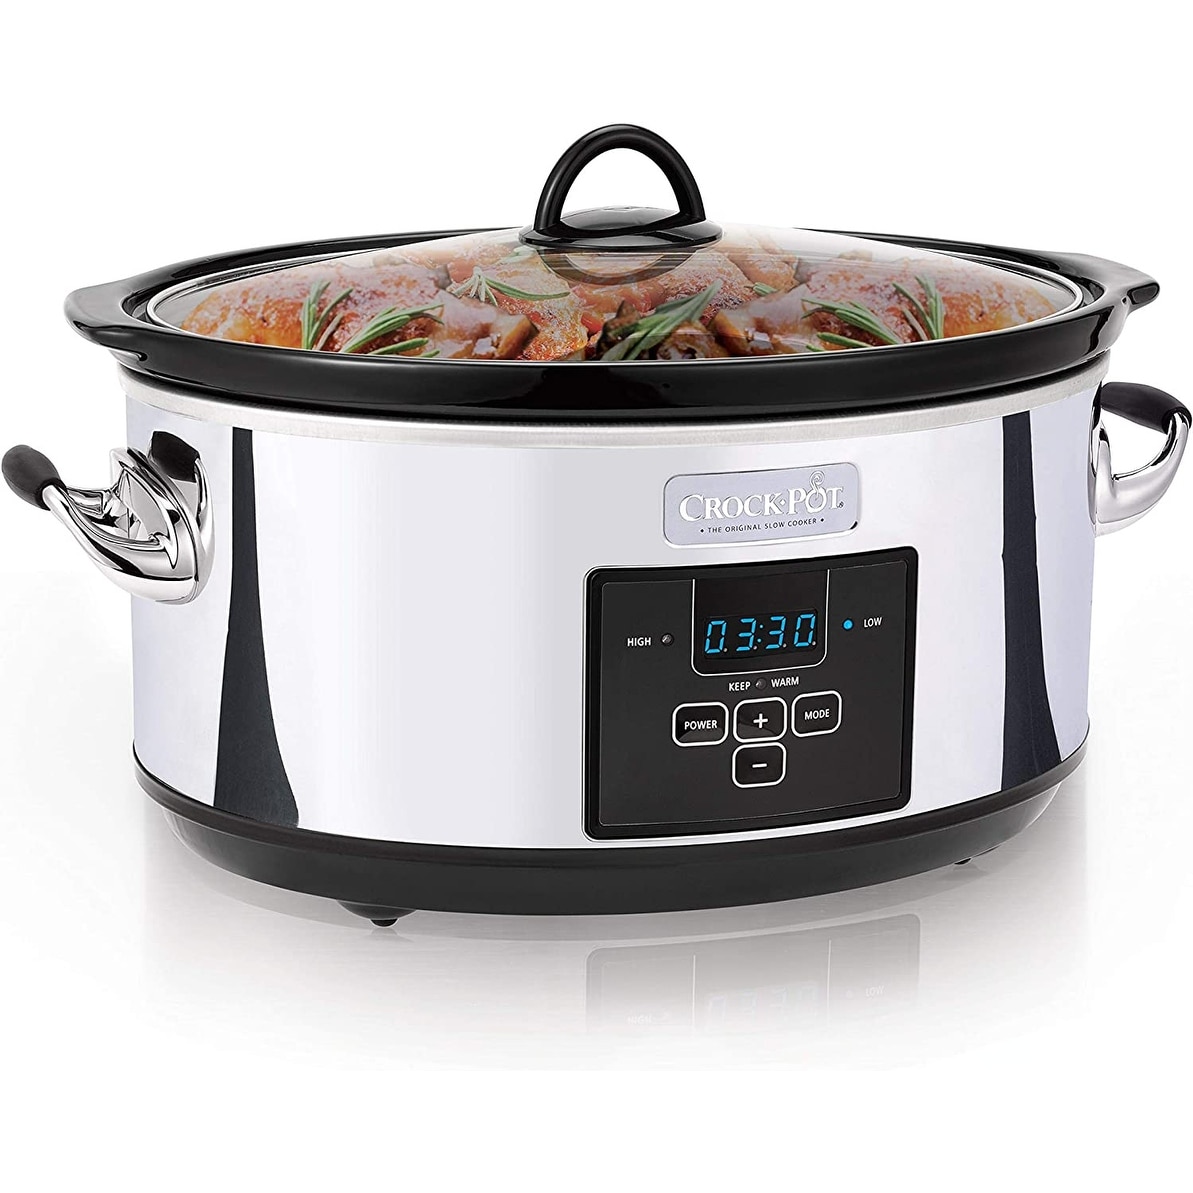 https://ak1.ostkcdn.com/images/products/is/images/direct/ddf5485d9a361e5c1ad085608580a191bf8075ca/7-Quart-Slow-Cooker-with-Programmable-Controls-and-Digital-Timer%2C-Polished-Platinum.jpg